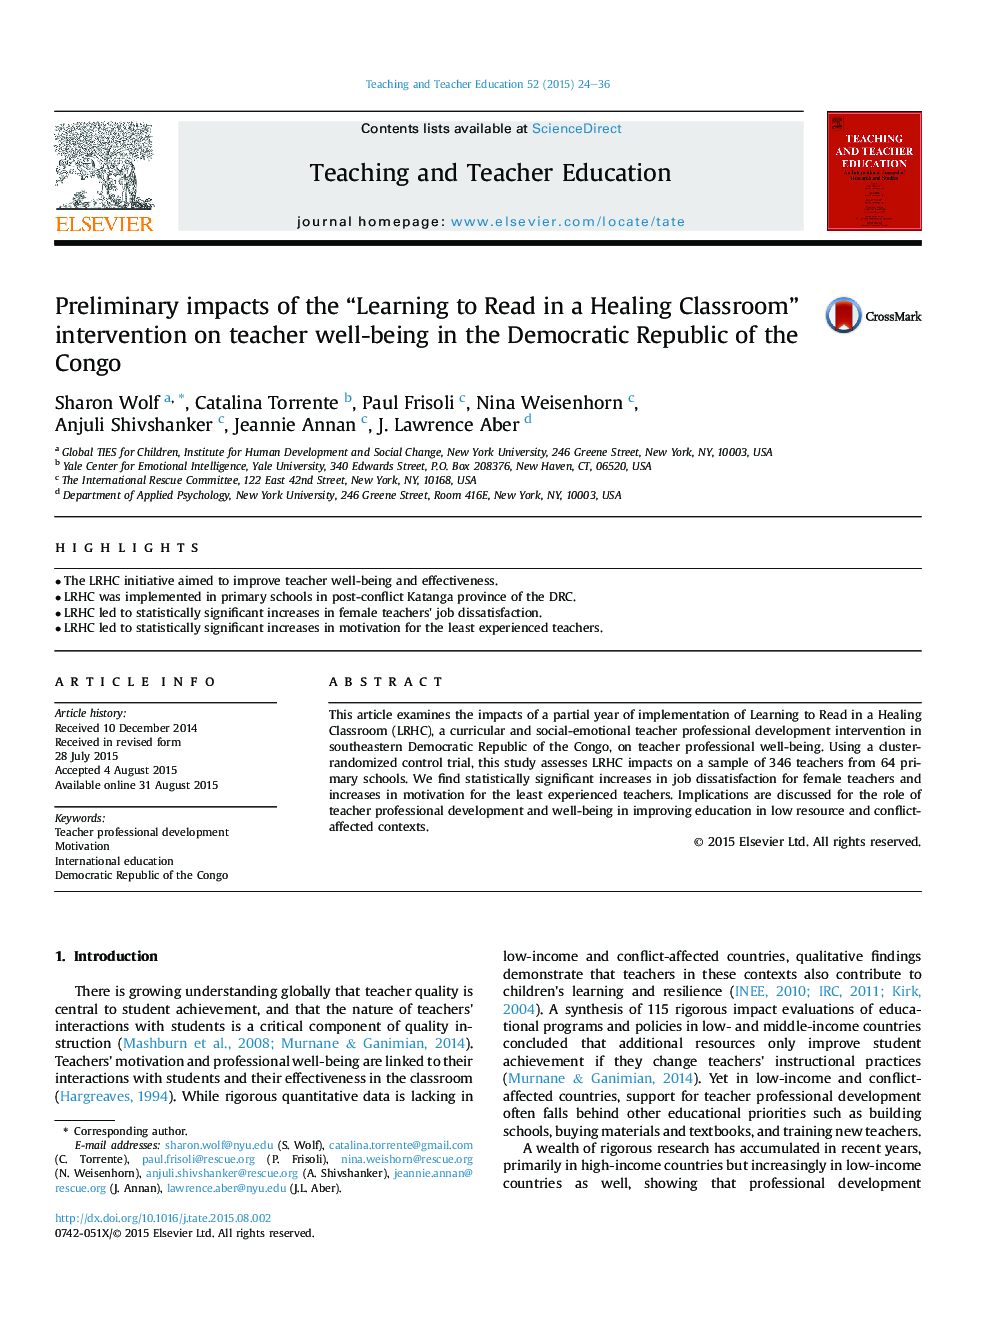 Preliminary impacts of the “Learning to Read in a Healing Classroom” intervention on teacher well-being in the Democratic Republic of the Congo